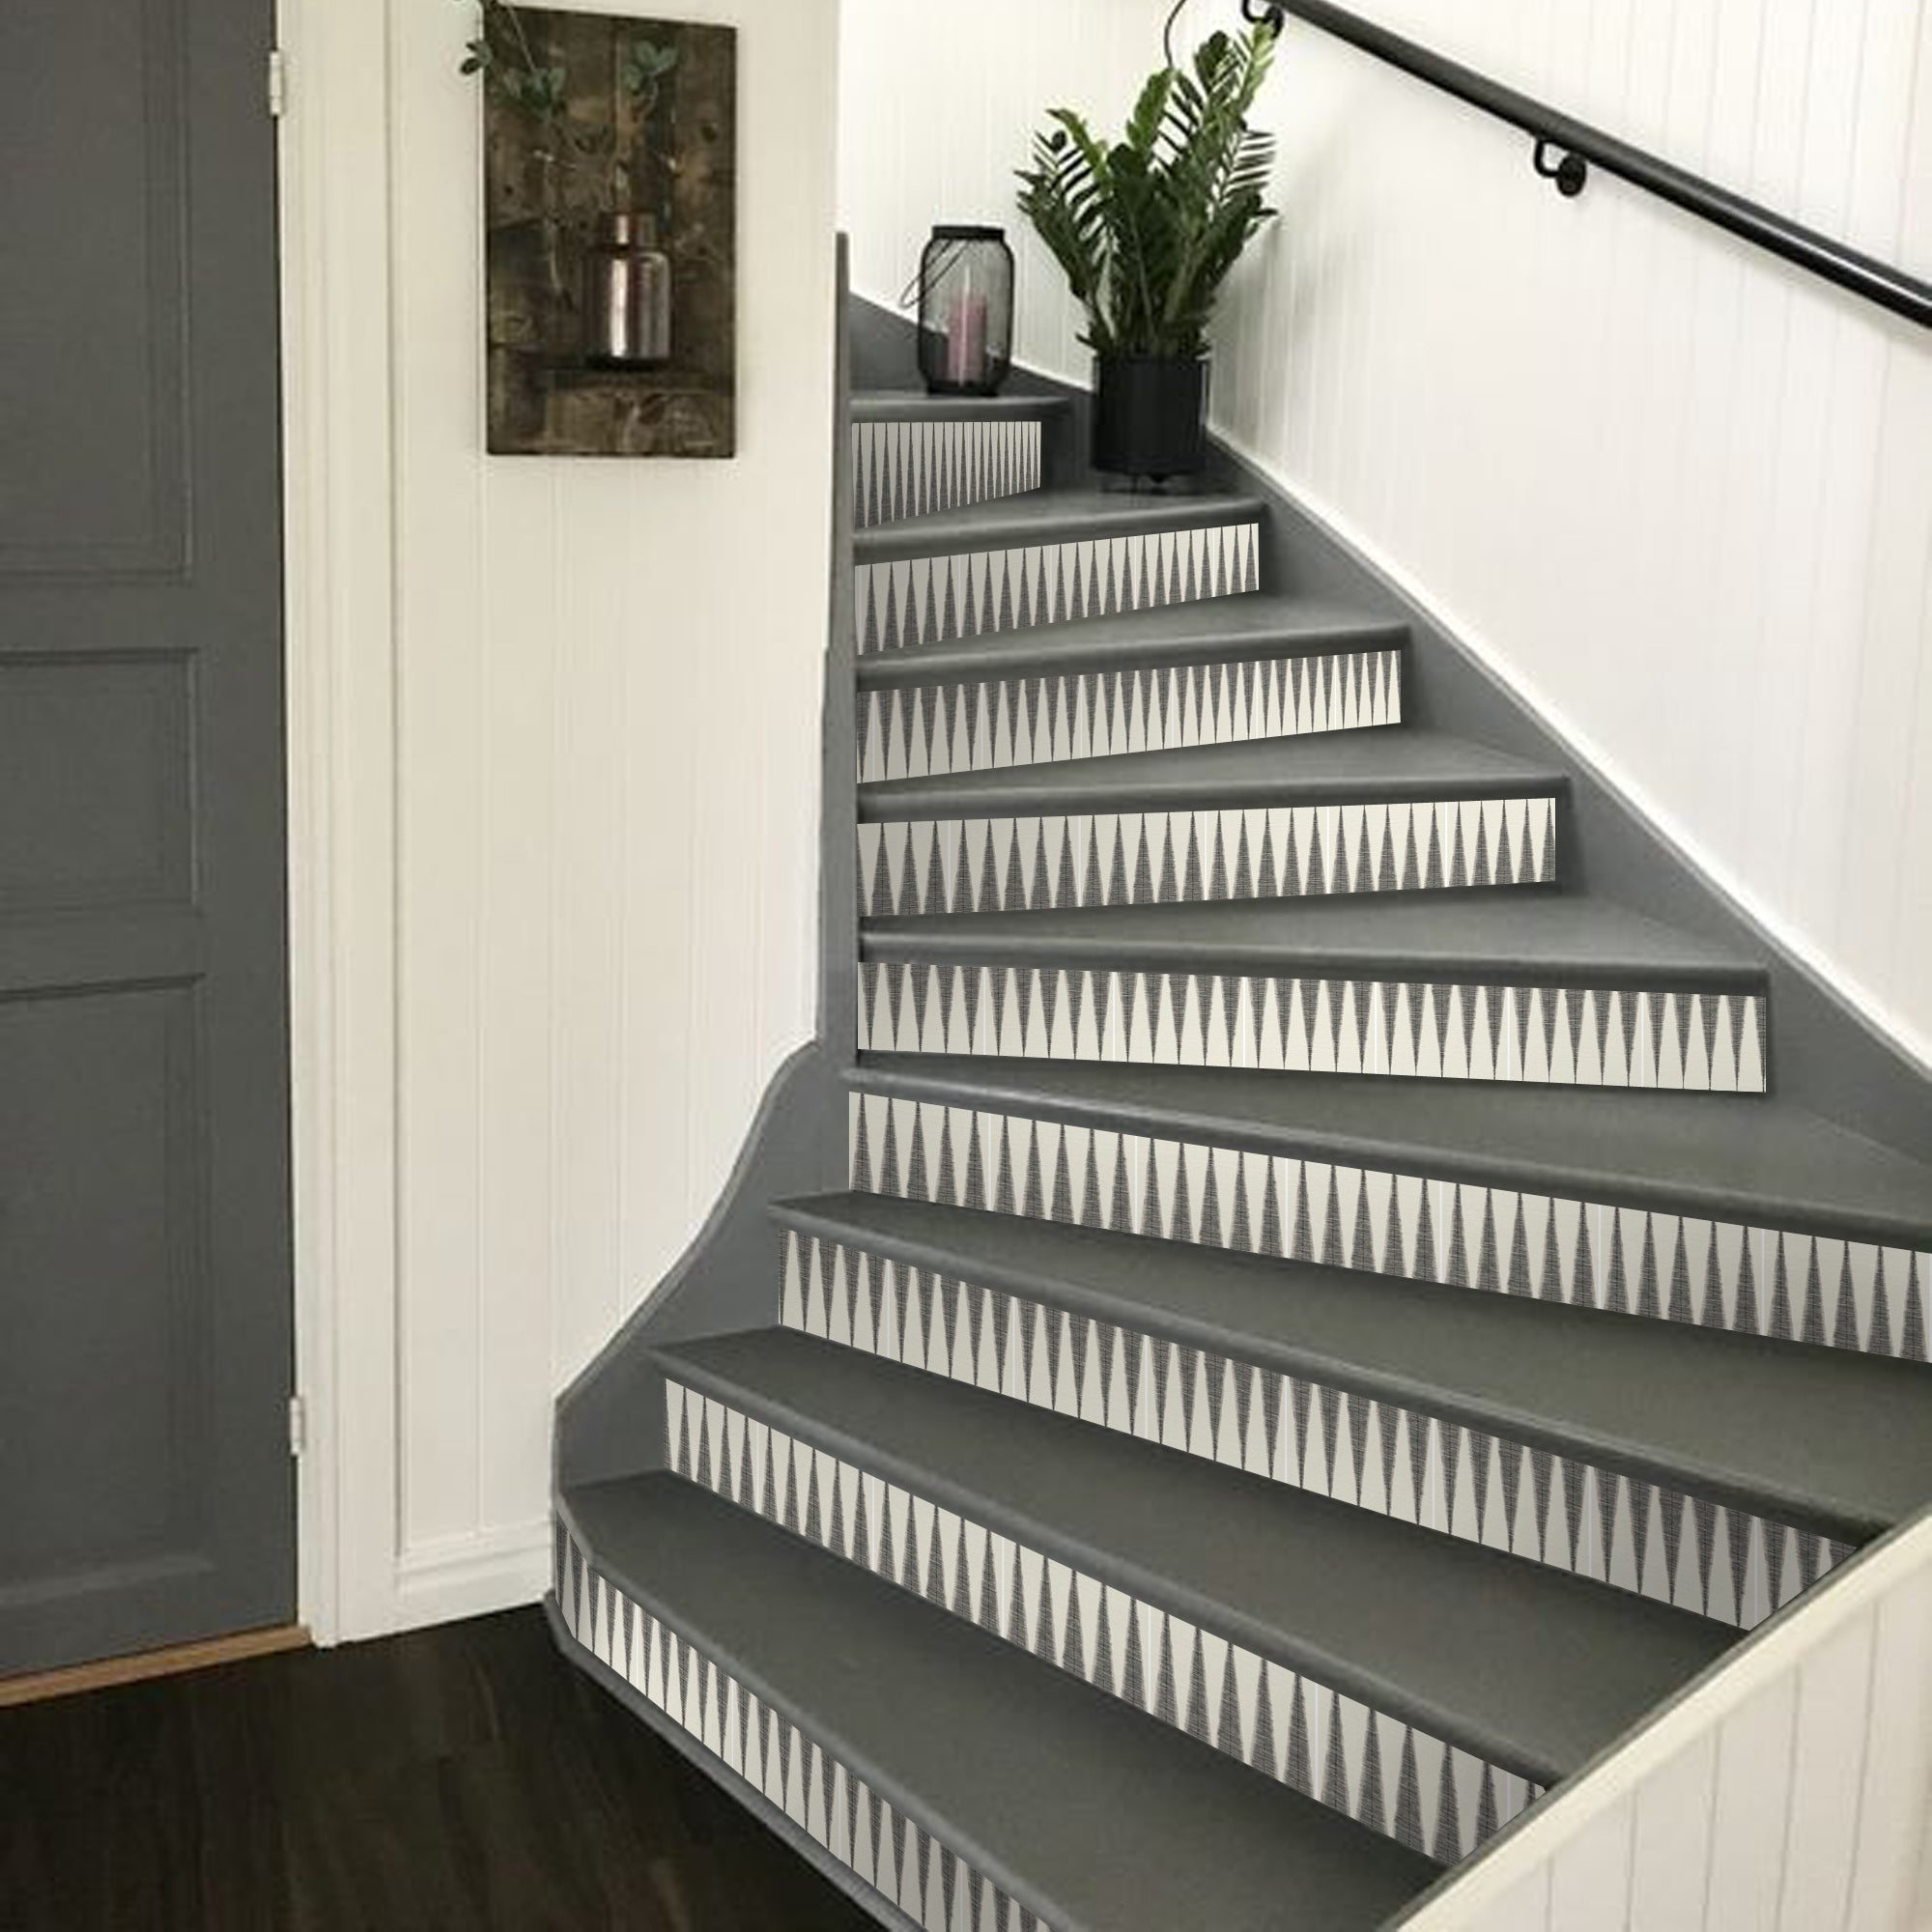 Katano in Charcoal Stair Riser Stickers